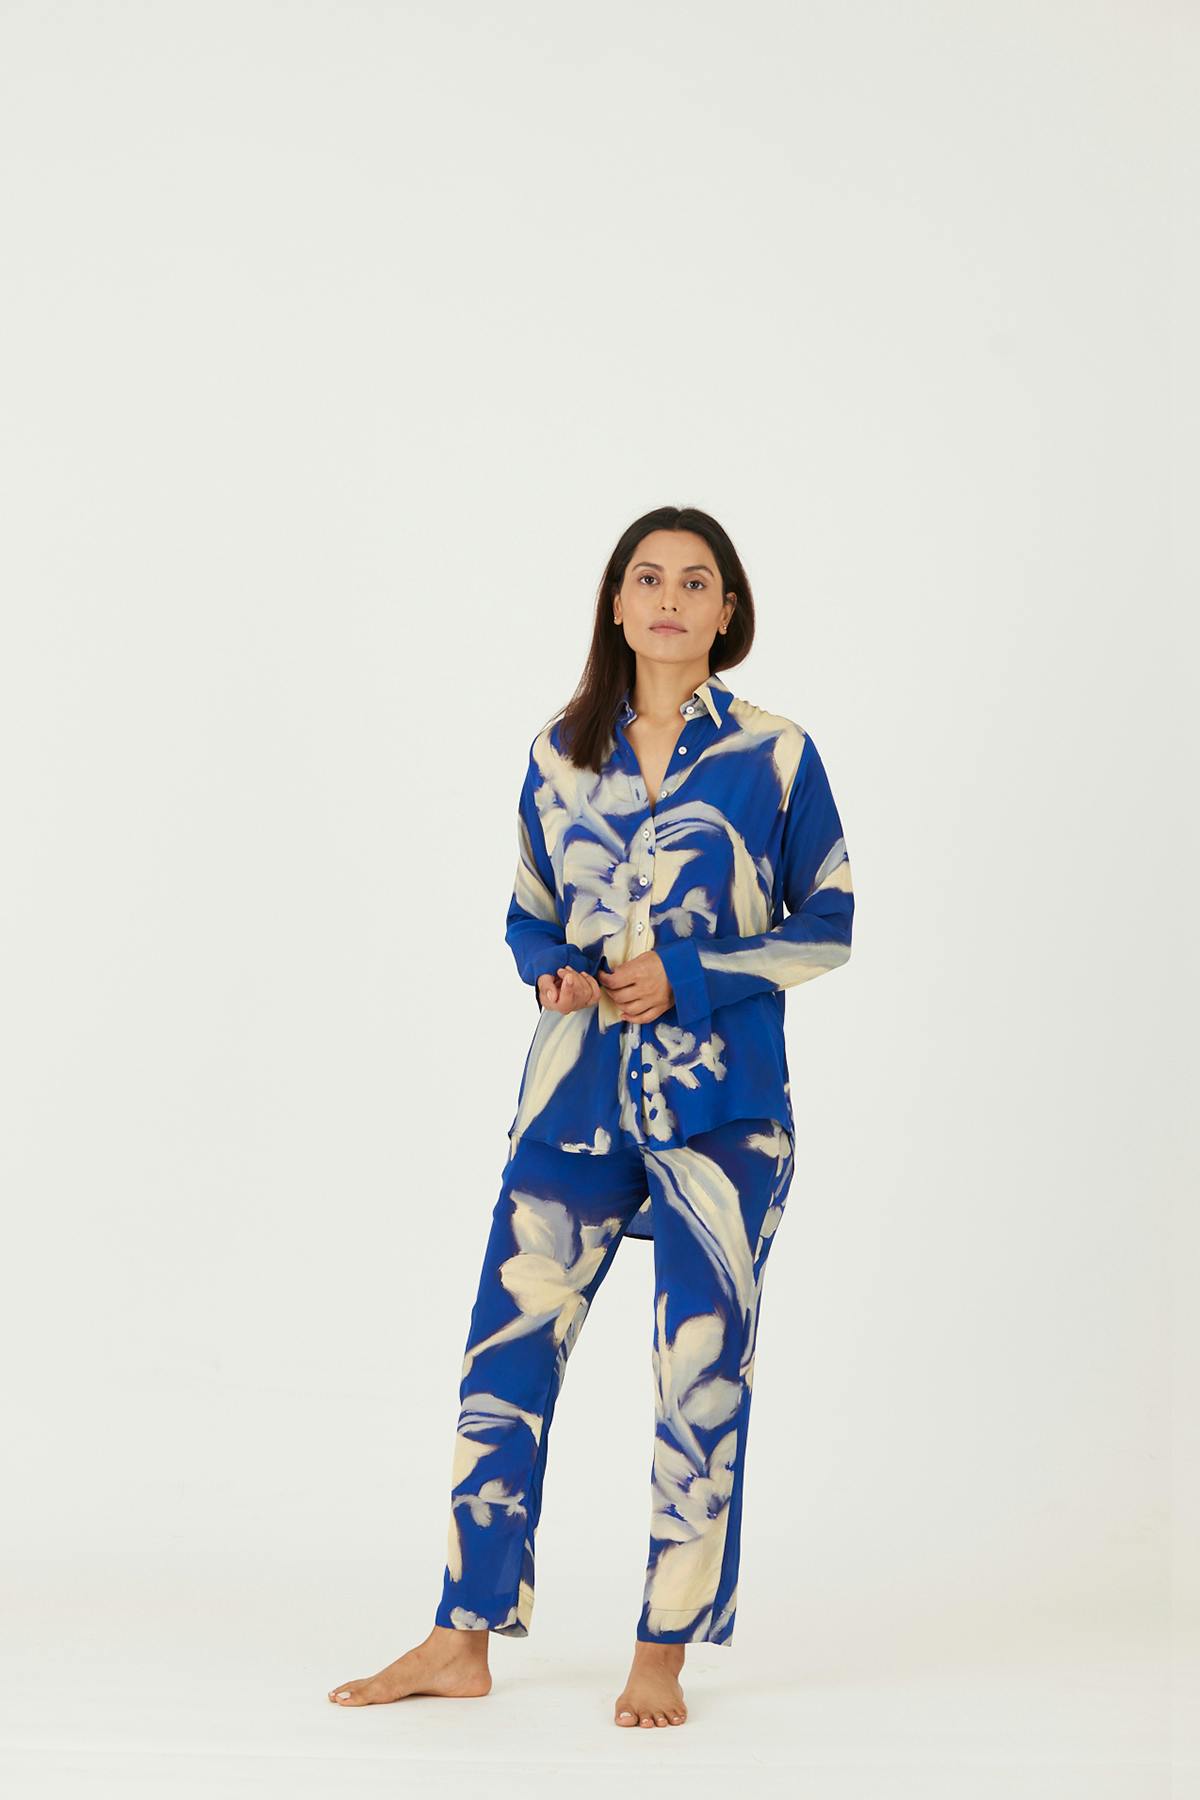 Primary image of CHICORY CO-ORD, a product by Yam India